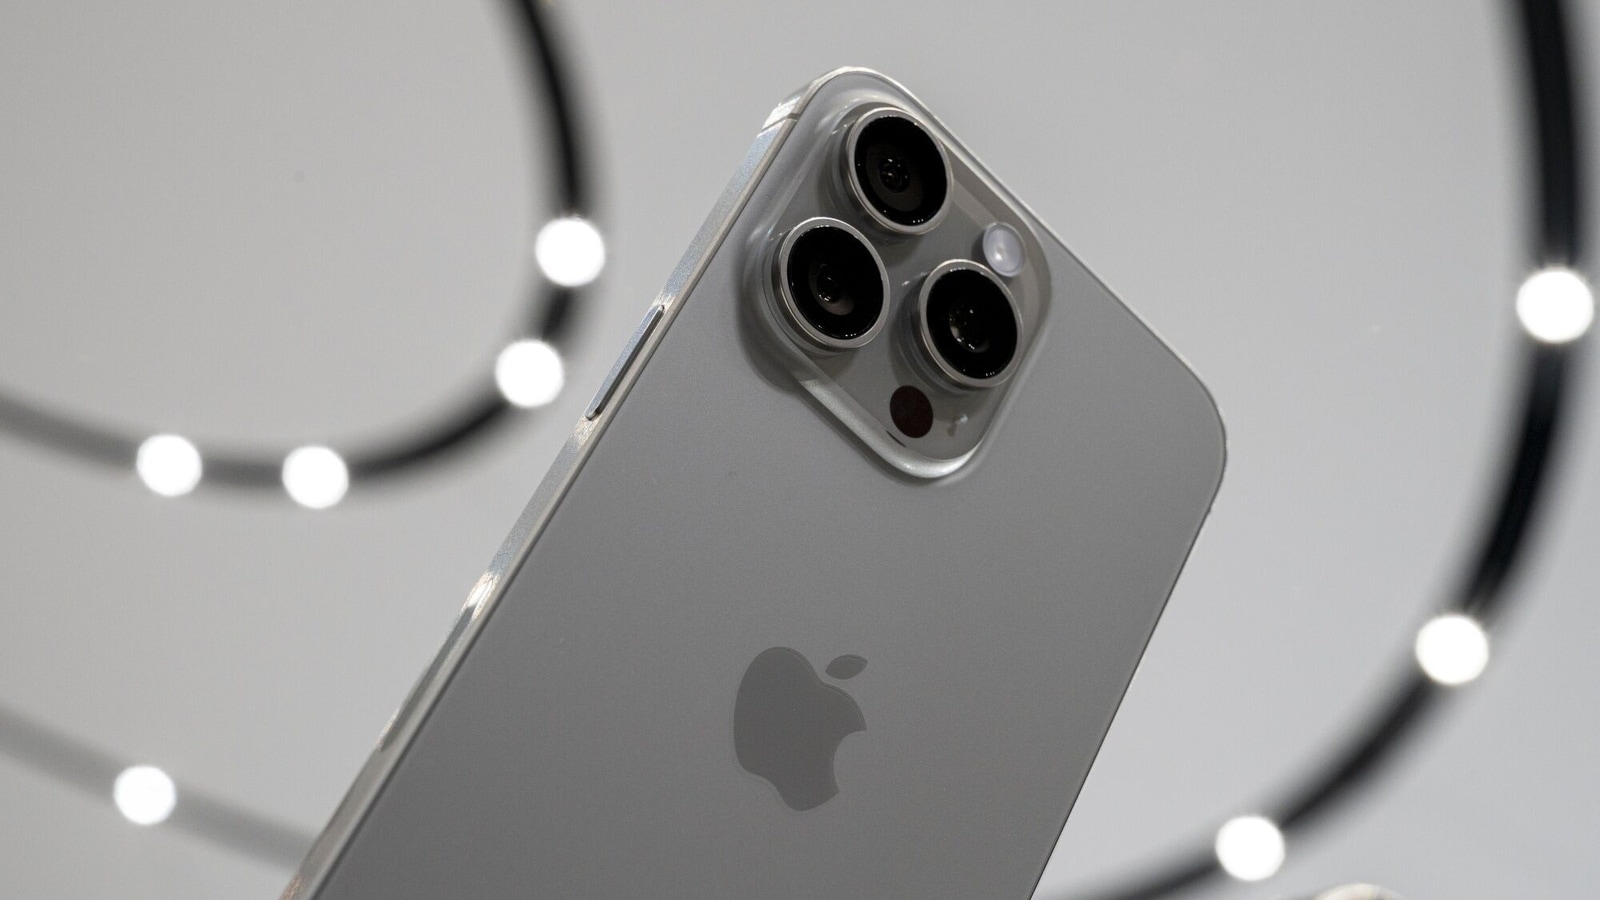 Iphone 16 Professional tetraprism digicam with 5x optical zoom coming, says TrendForce